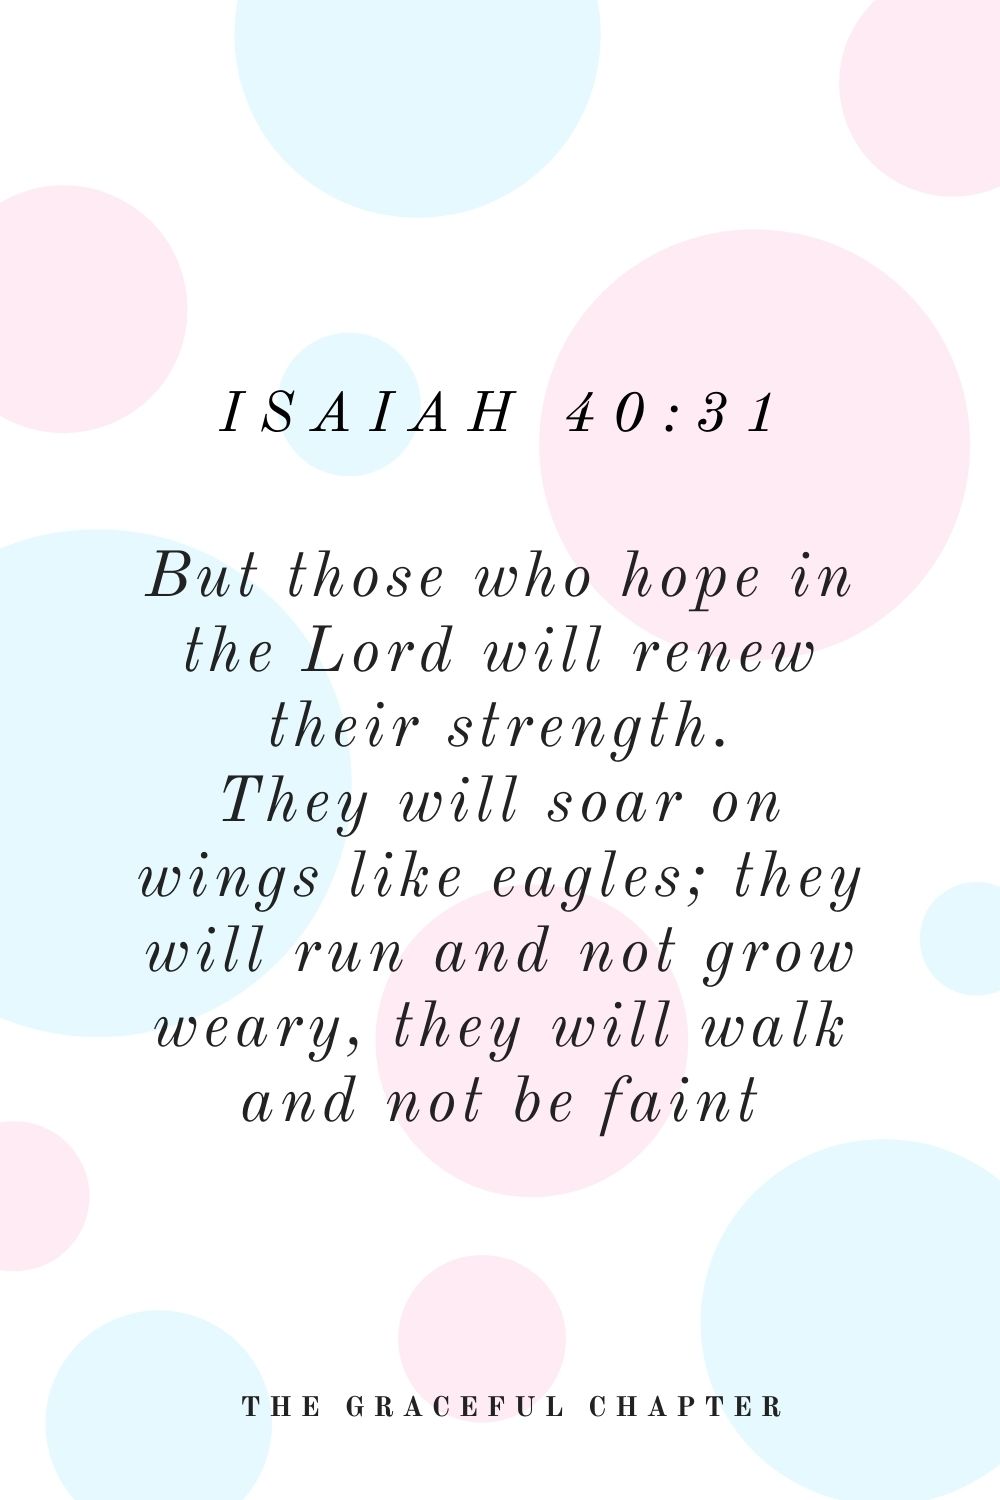 But those who hope in the Lord will renew their strength. They will soar on wings like eagles; they will run and not grow weary, they will walk and not be faint Isaiah 40:31